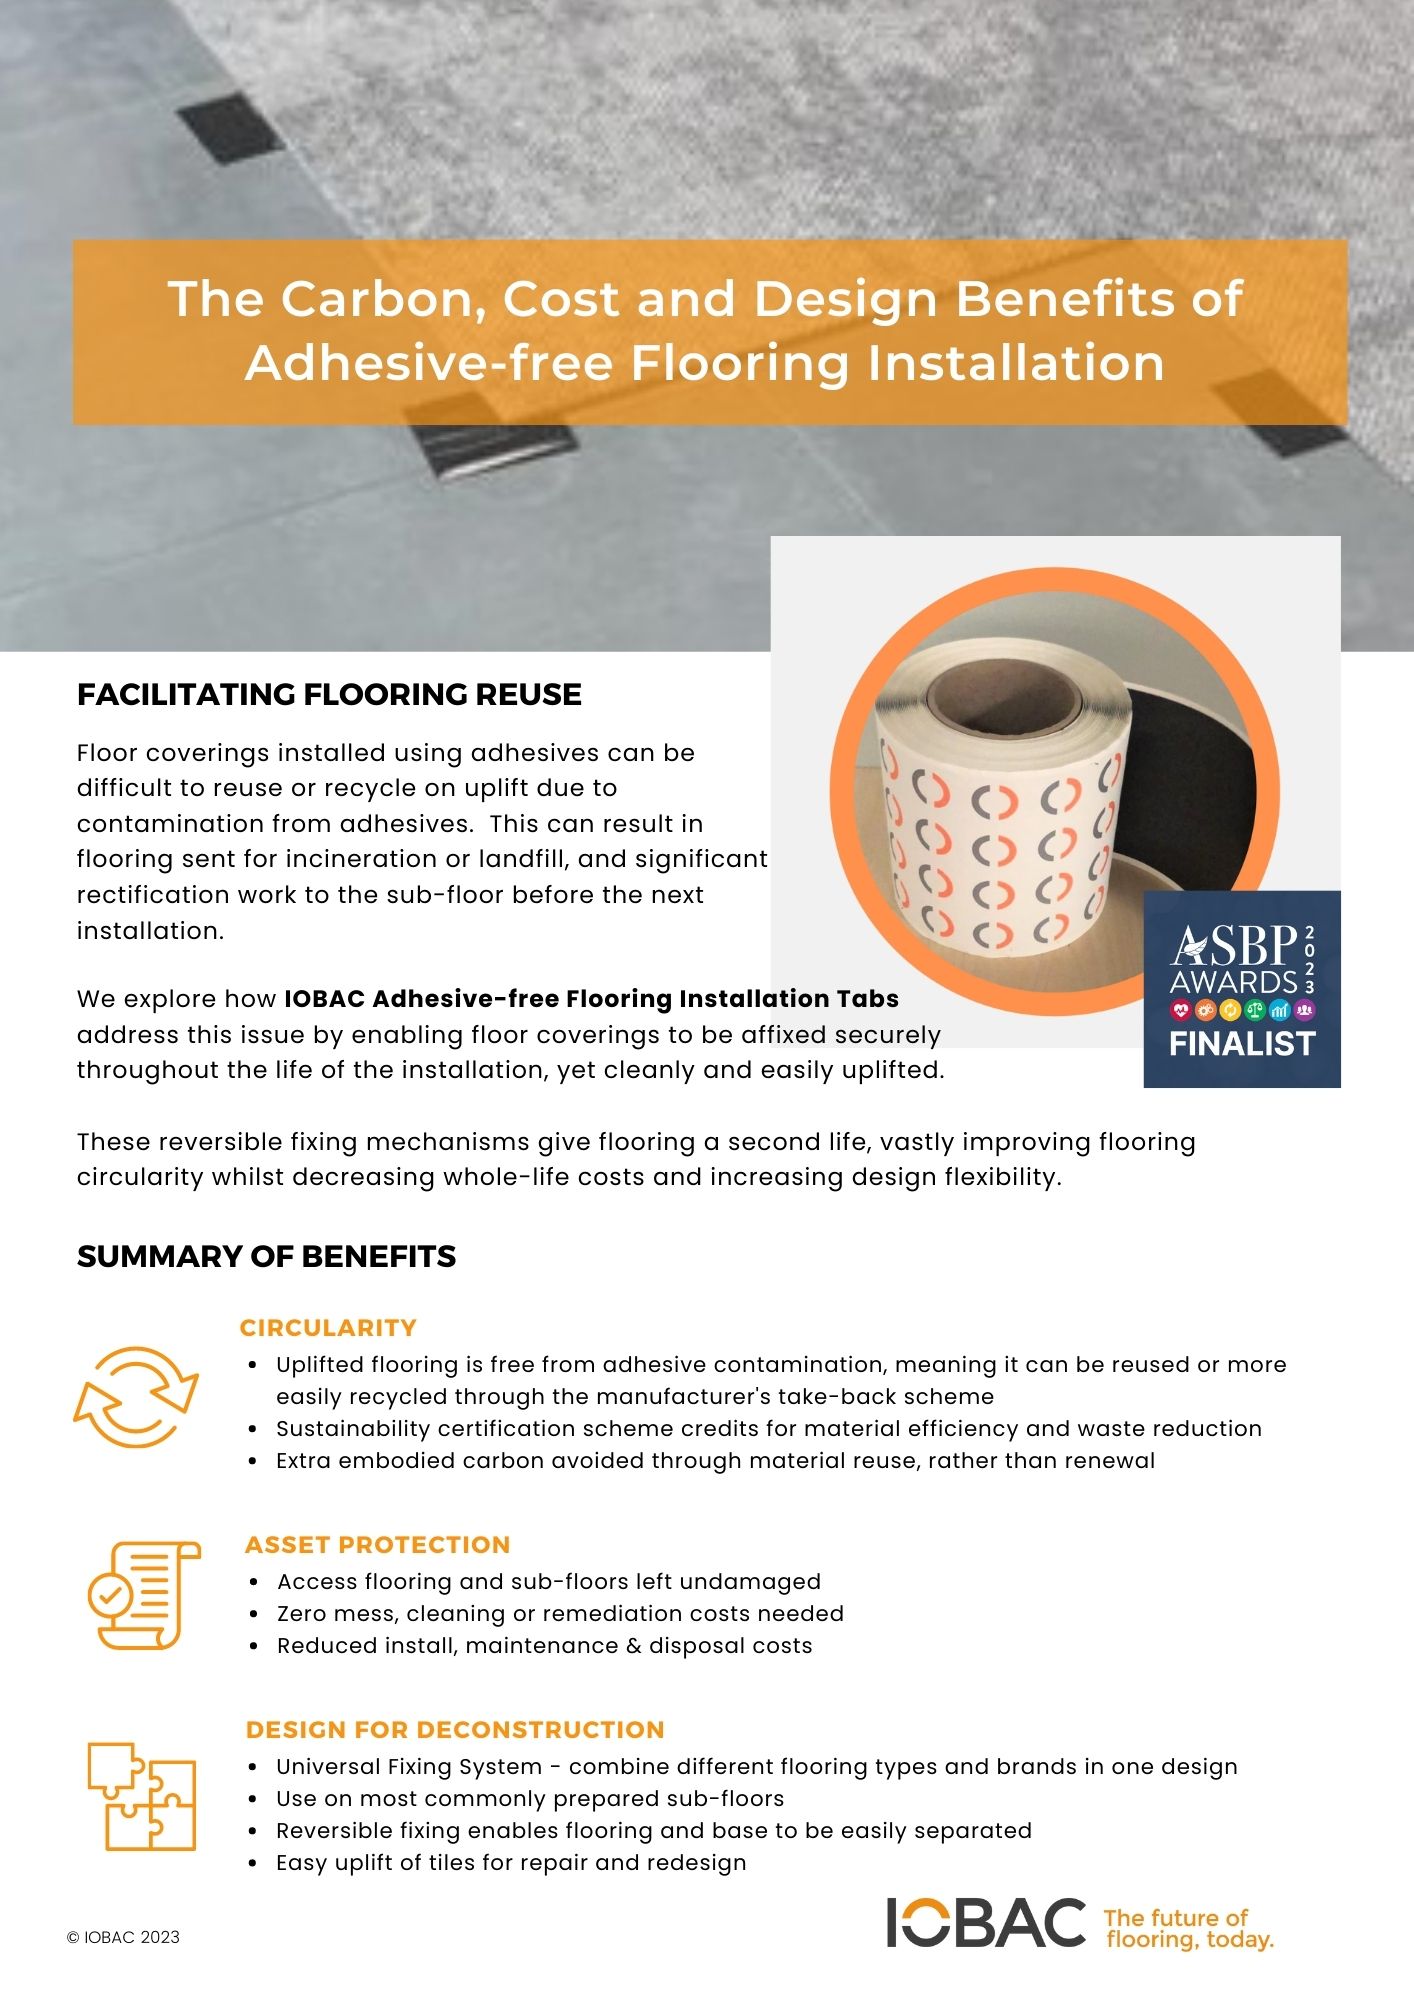 Cost, Carbon & Design Benefits of Adhesive-free Flooring